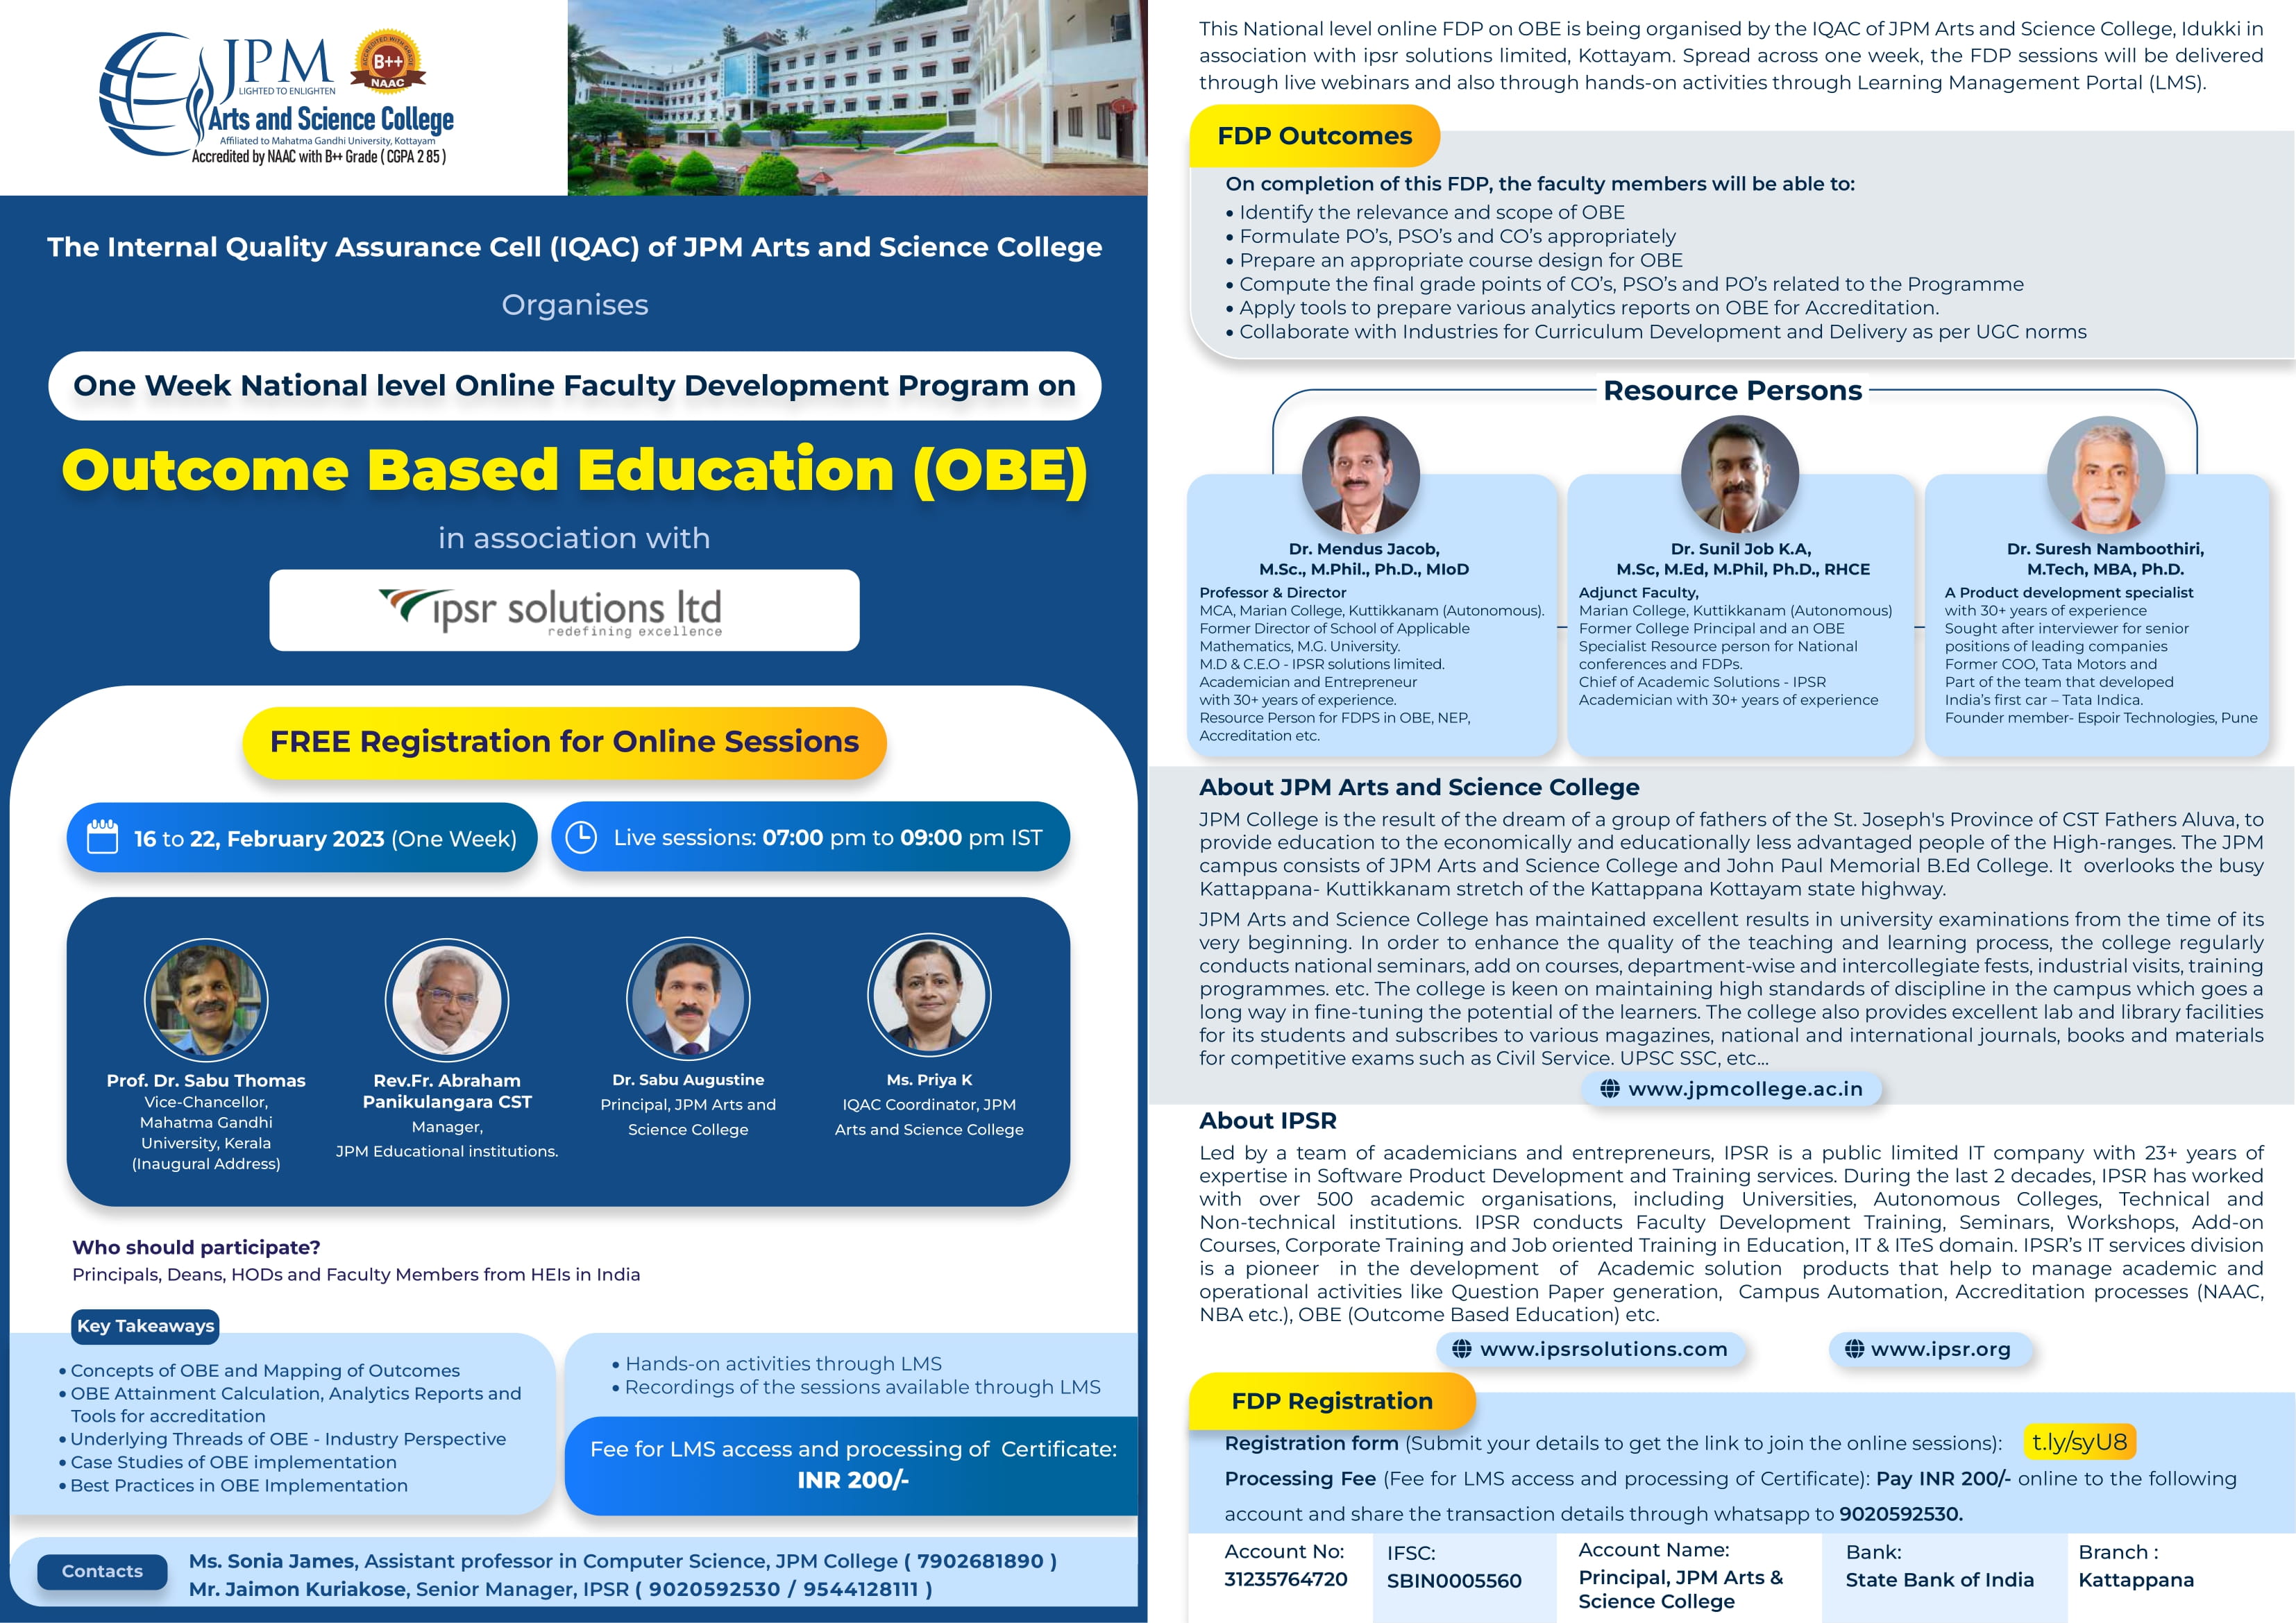 One Week National level Online Faculty Development Program on Outcome Based Education (OBE)